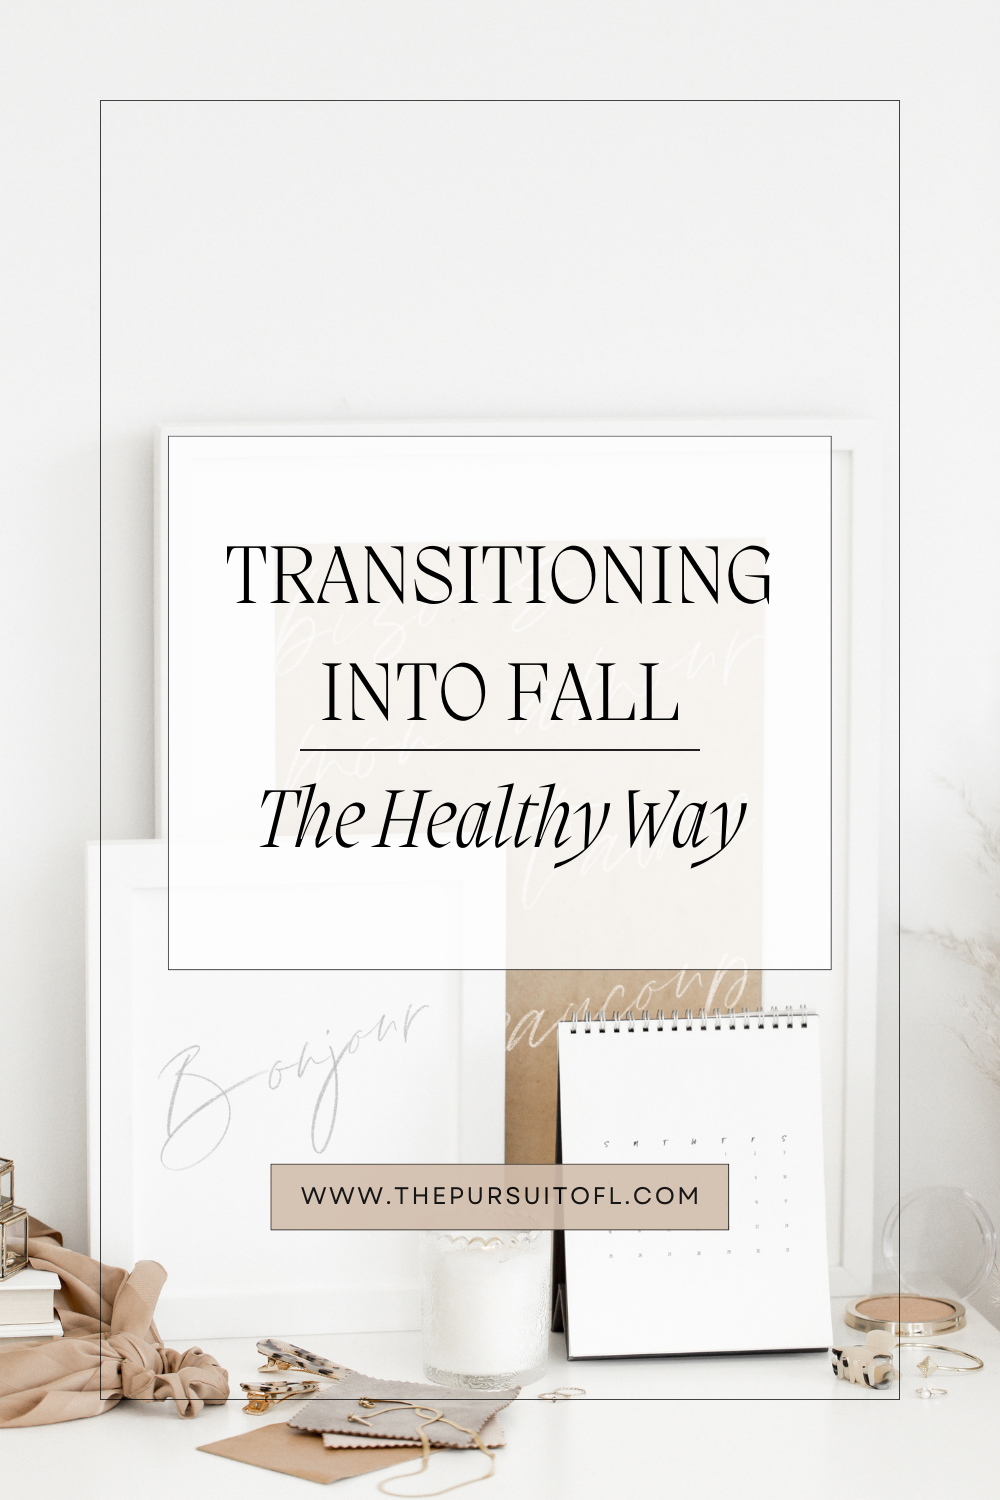 Transitioning into Fall The Healthy Way; Pinterest Image; Neutral tone setting with white picture frame and calendar with overlay text; The Pursuit of L